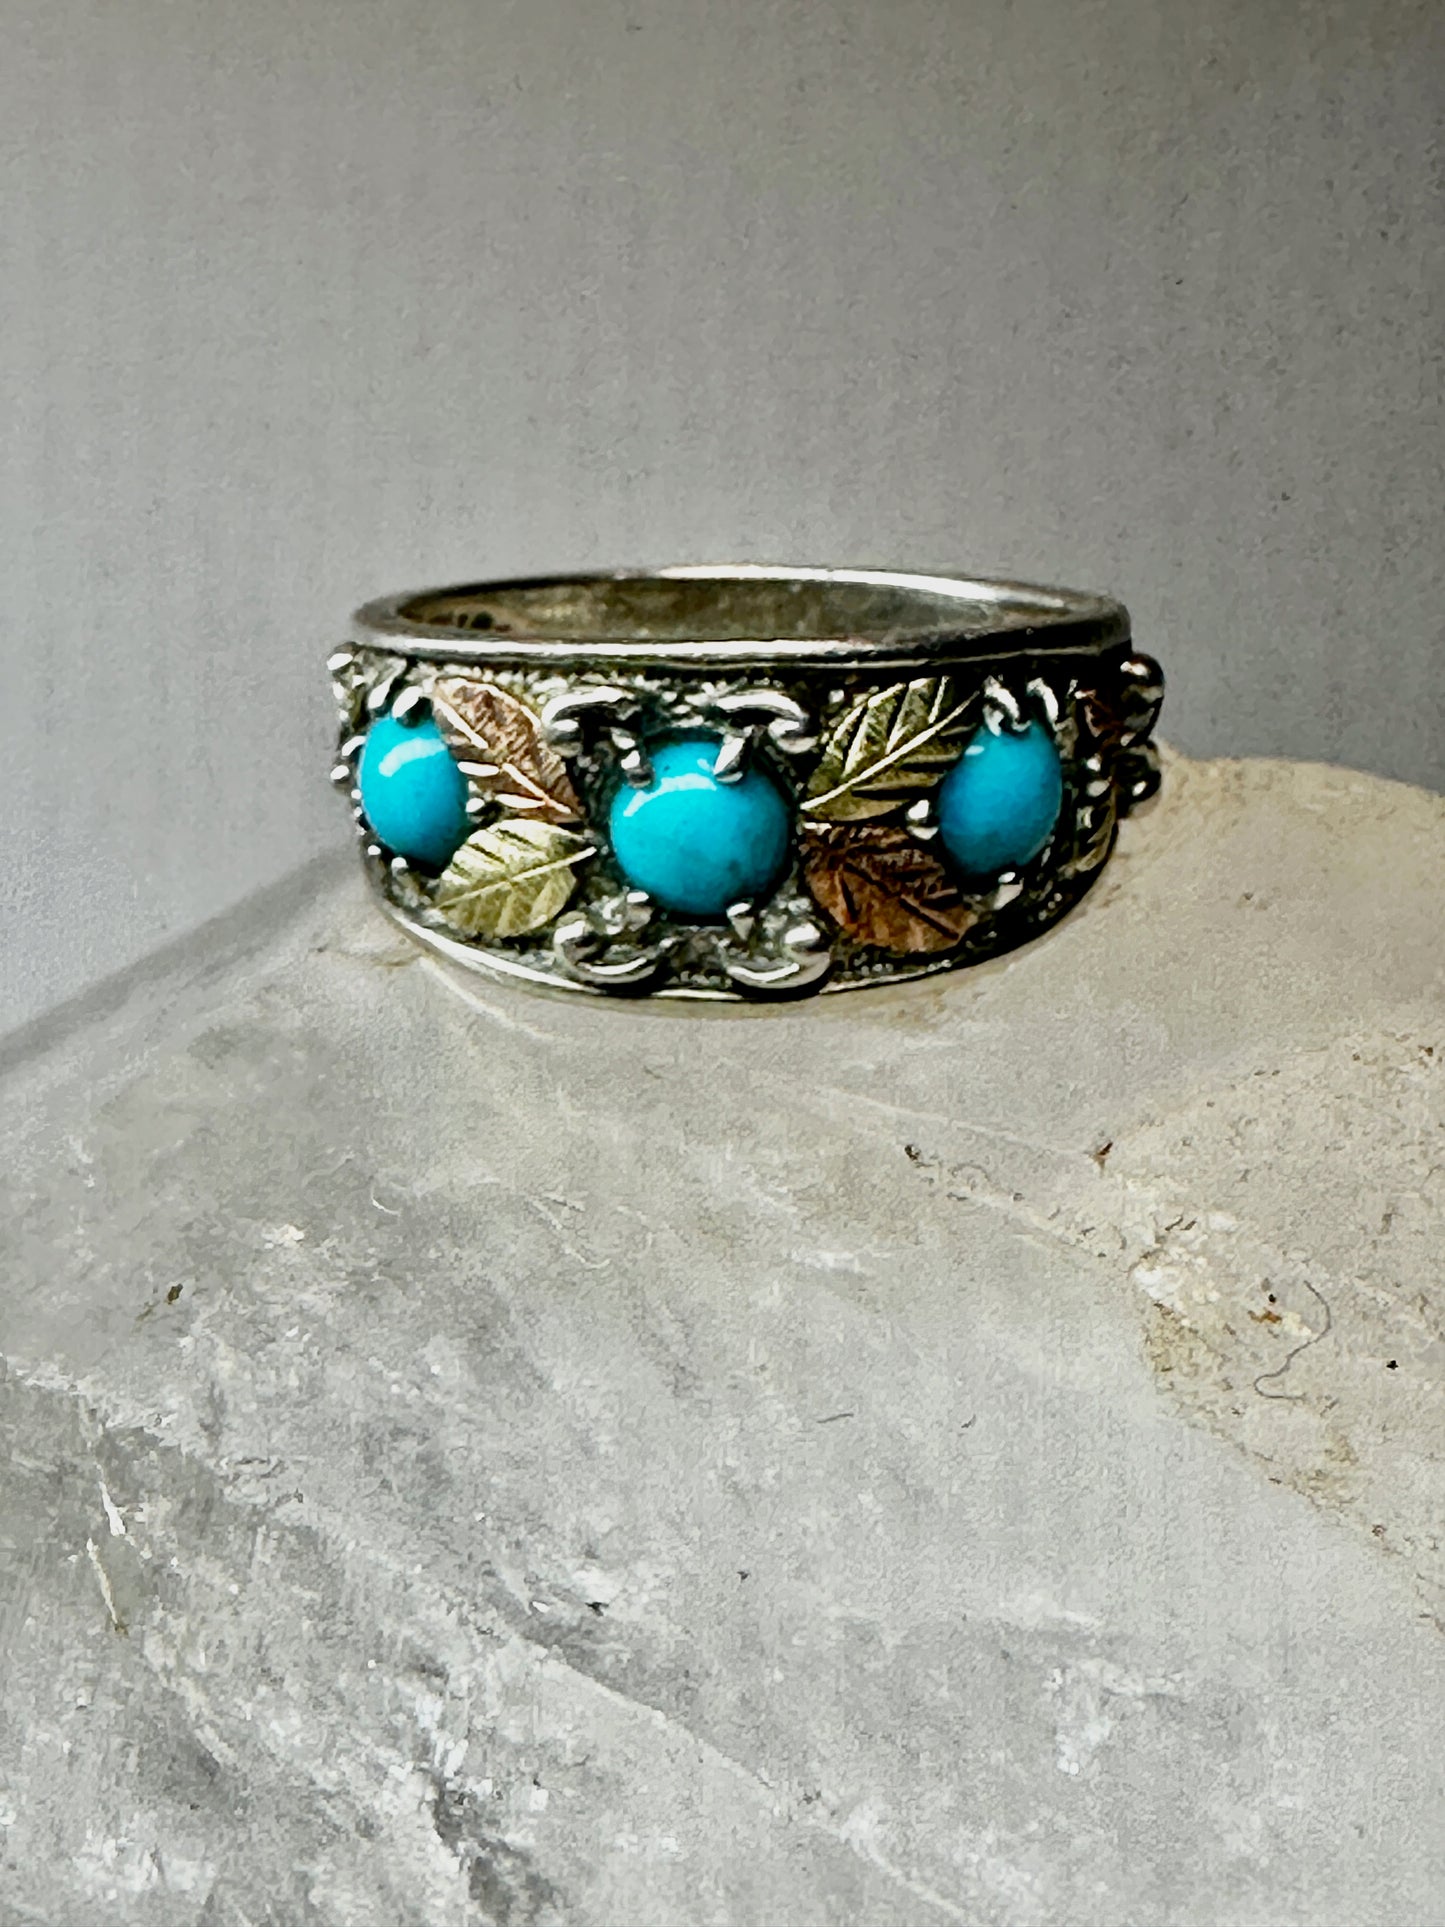 Black Hills Gold ring turquoise band size 8.75  sterling silver women